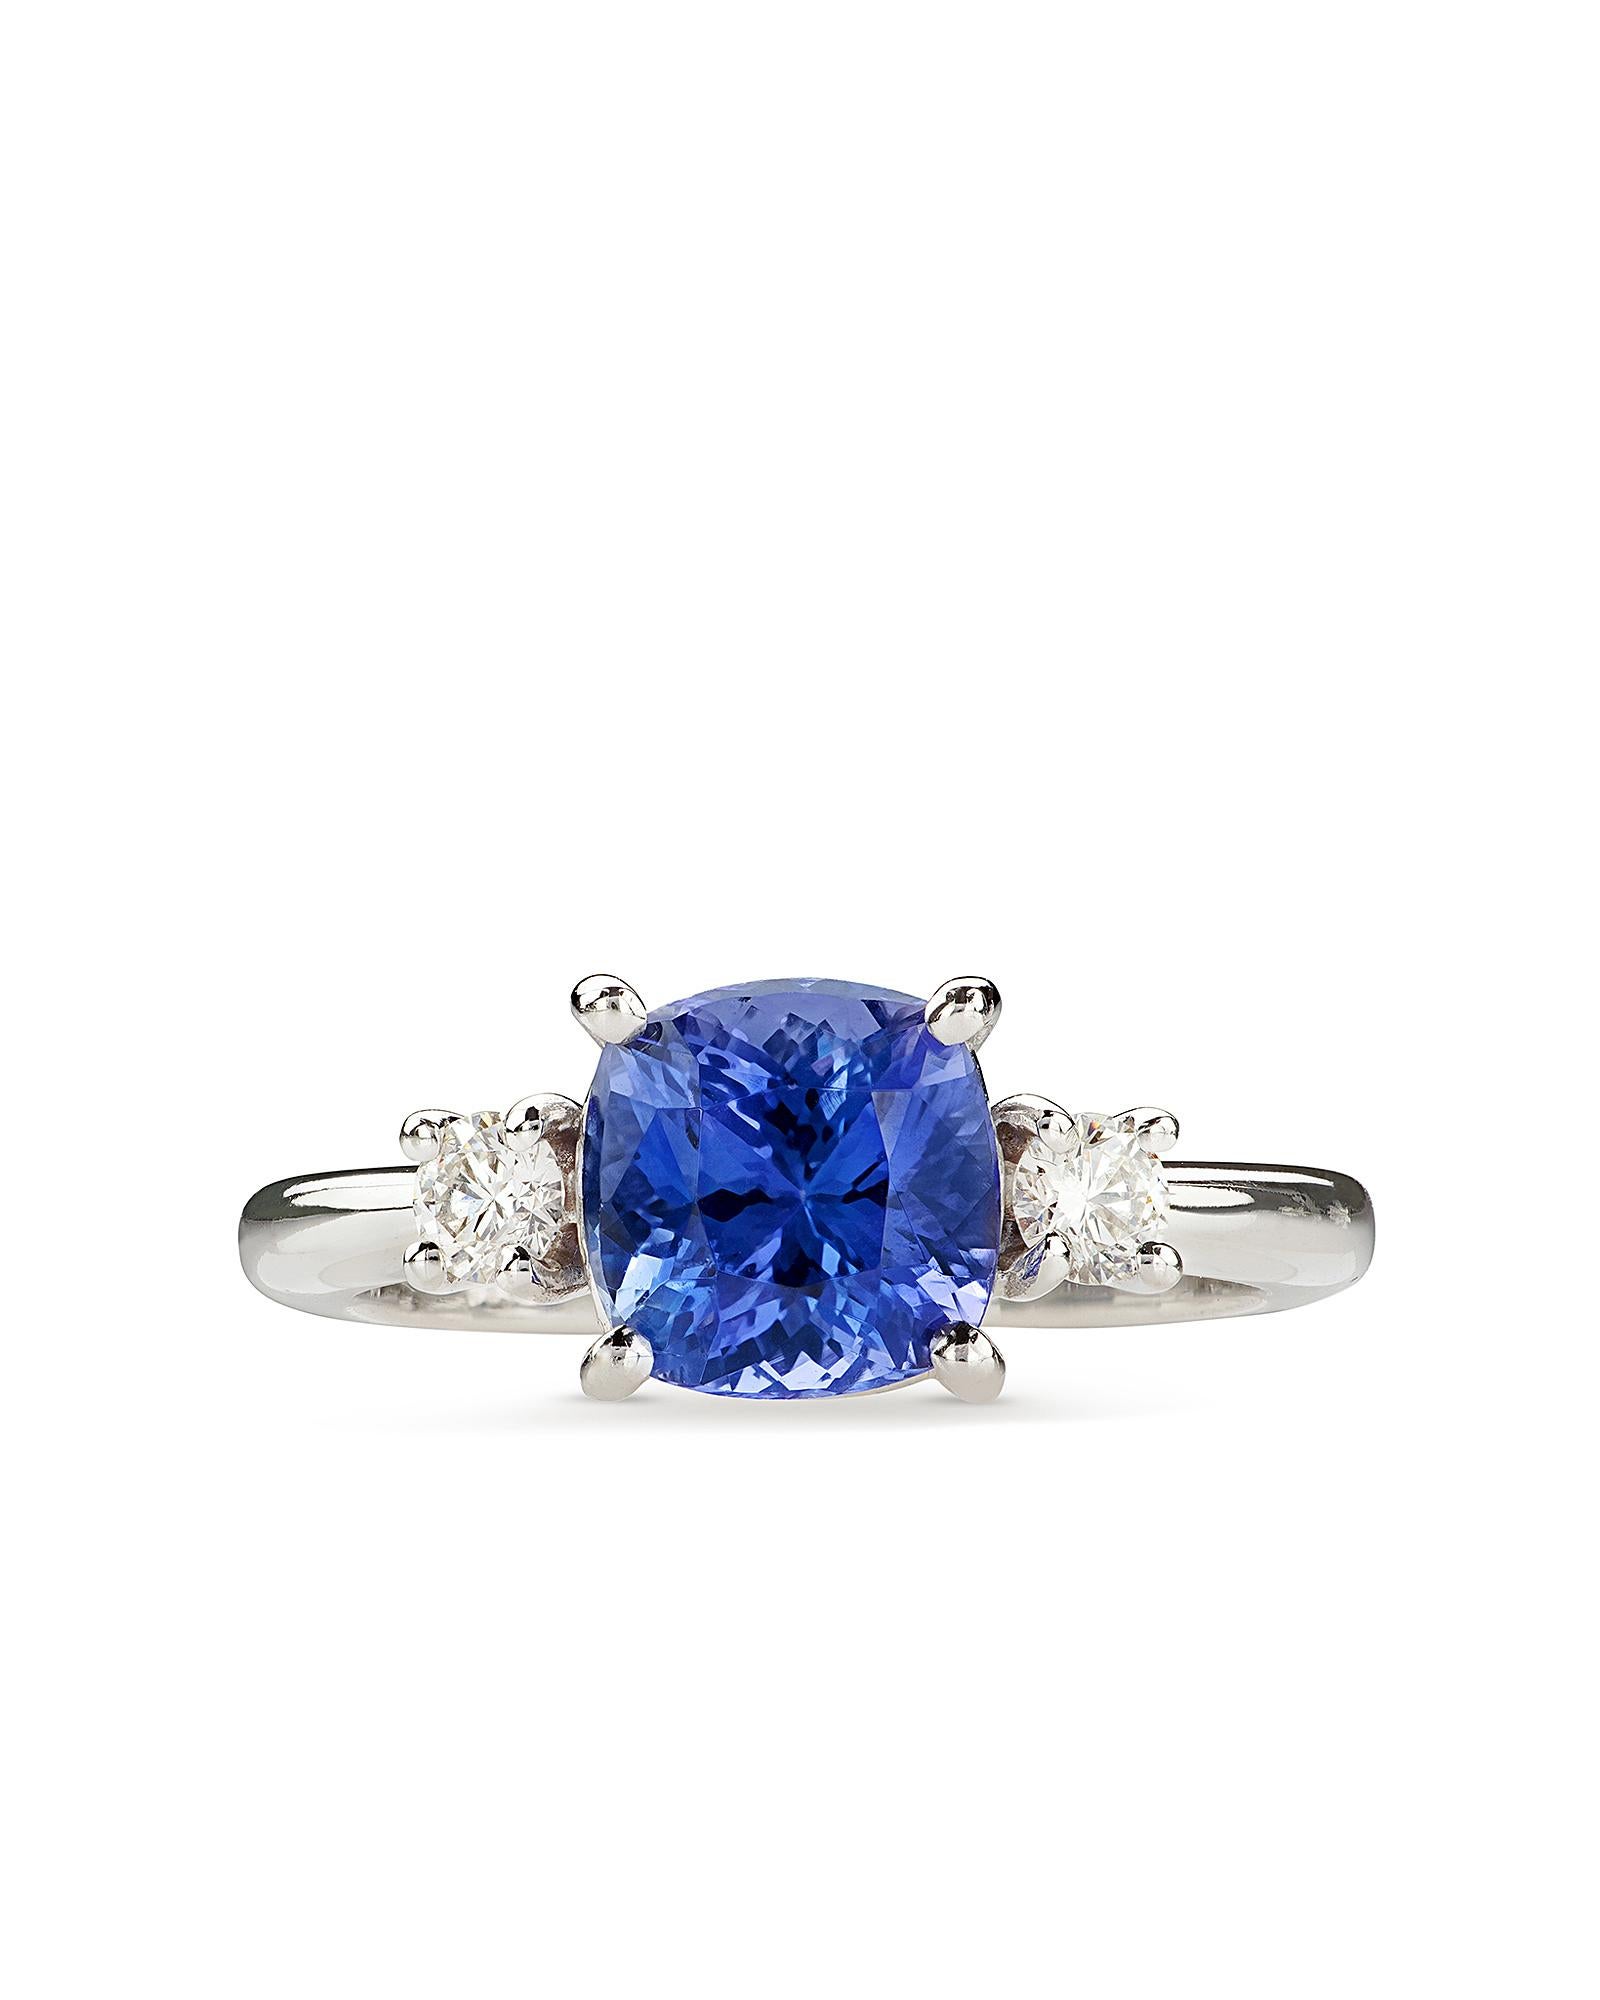 Two diamonds placed on the ring revive a rare tanzanite gem. The composition, fine and sophisticated result of a unique brilliance and elegance.

Characteristics:
• 18 carat white gold
• Tanzanite 2,67 carats
• Diamonds 0,25 carats
• Weight 6,00